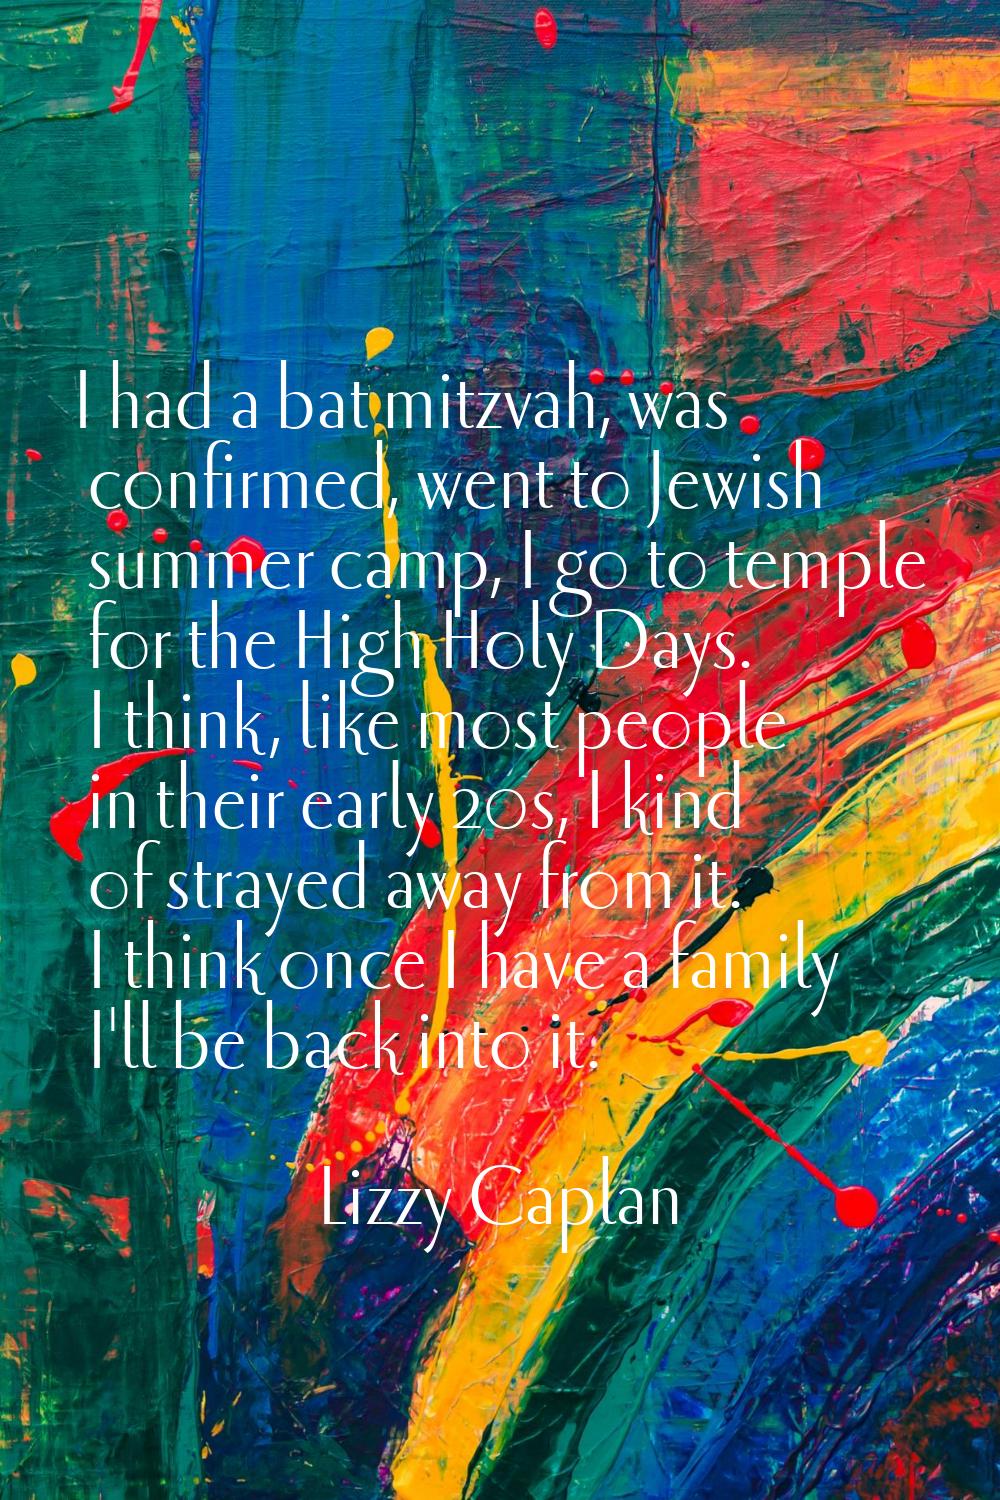 I had a bat mitzvah, was confirmed, went to Jewish summer camp, I go to temple for the High Holy Da